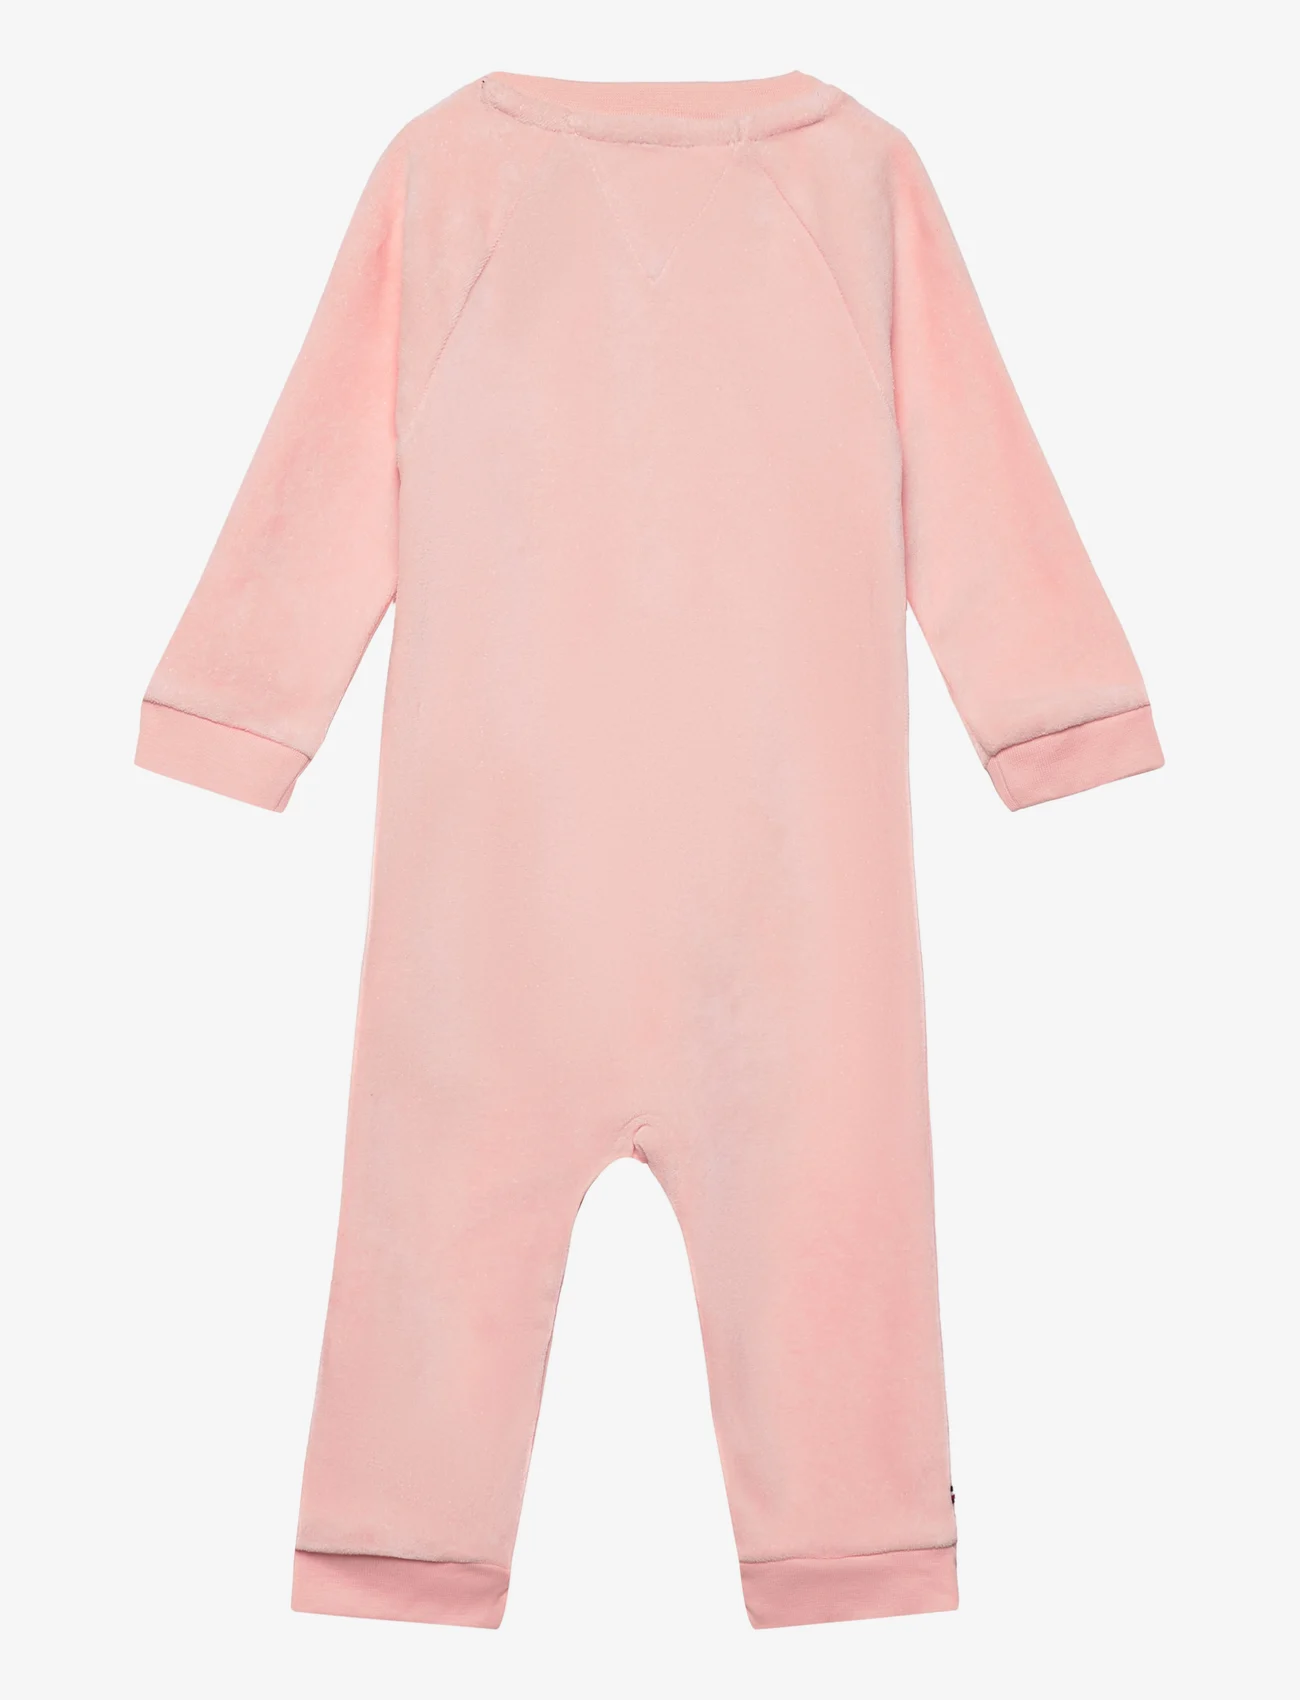 Tommy Hilfiger - BABY CURVED MONOTYPE COVERALL - long-sleeved - pink crystal - 1